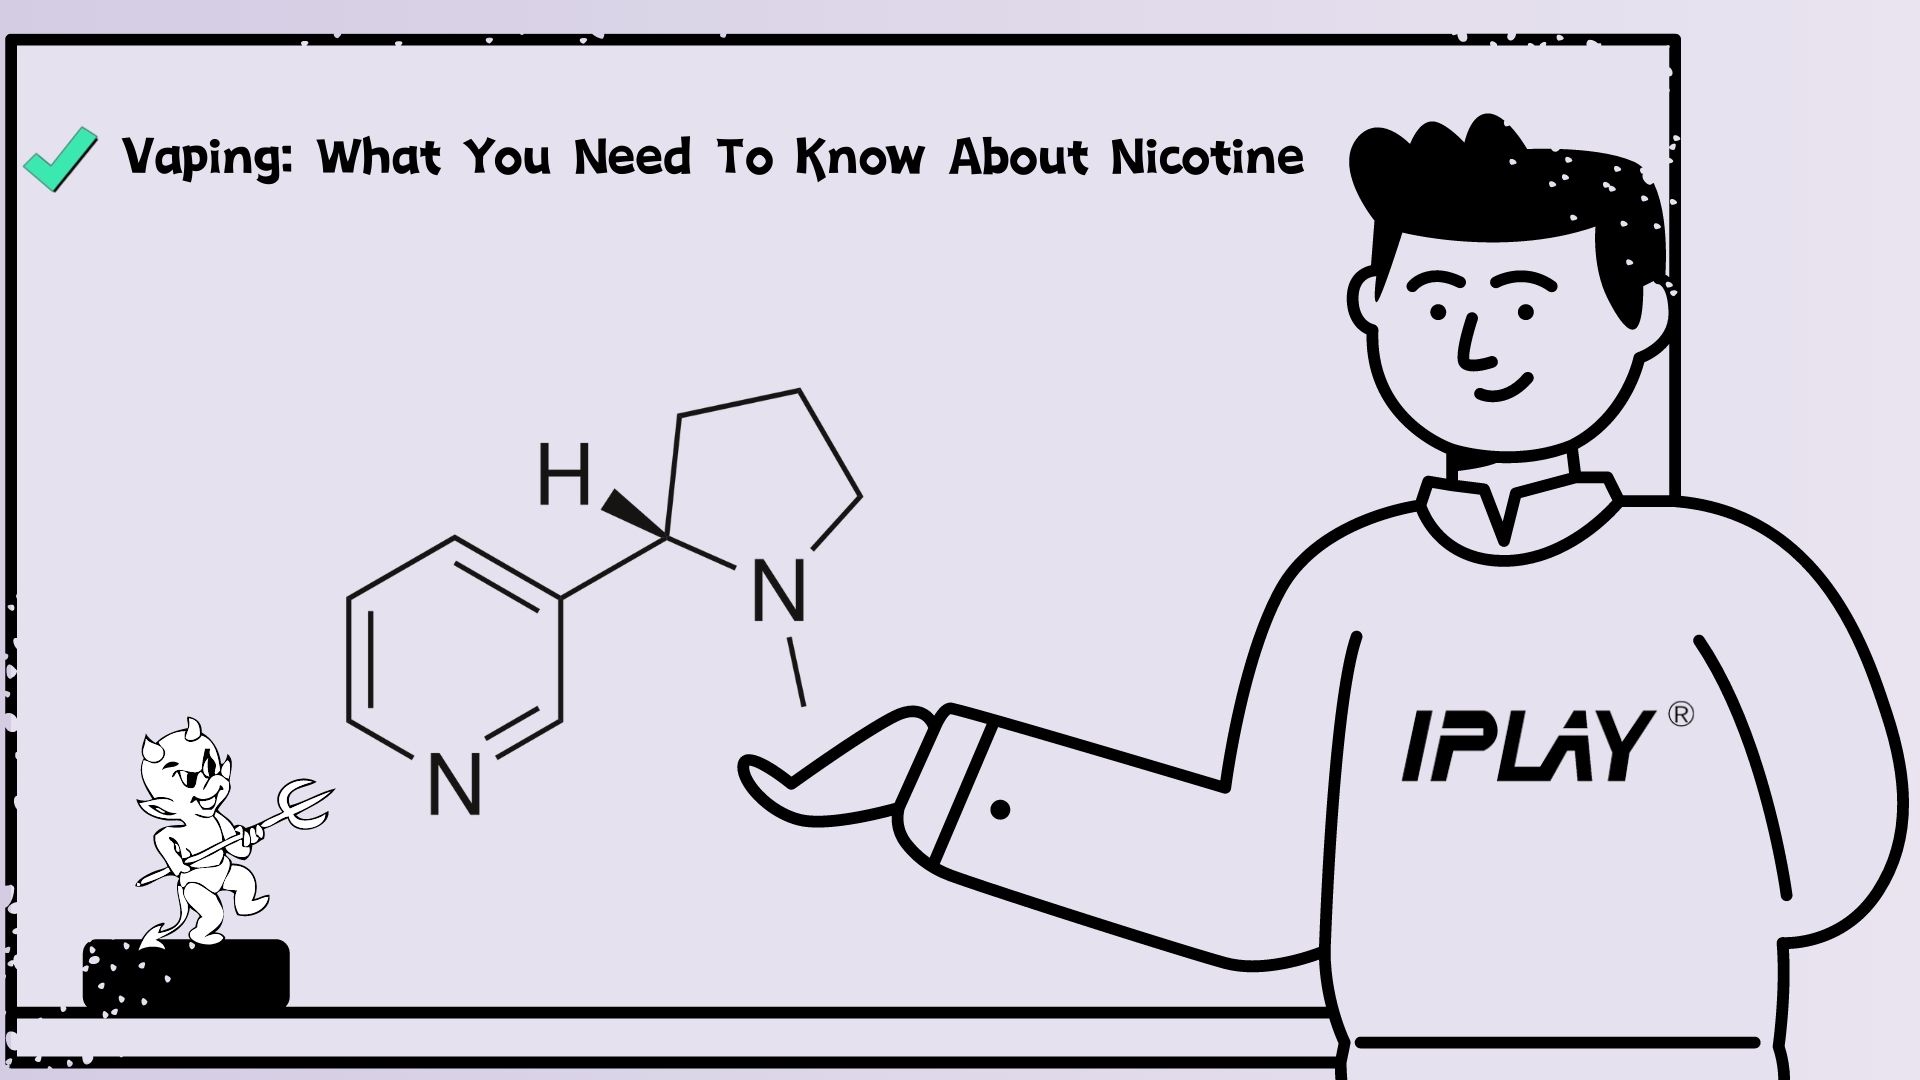 Vaping: What You Need To Know About Nicotine